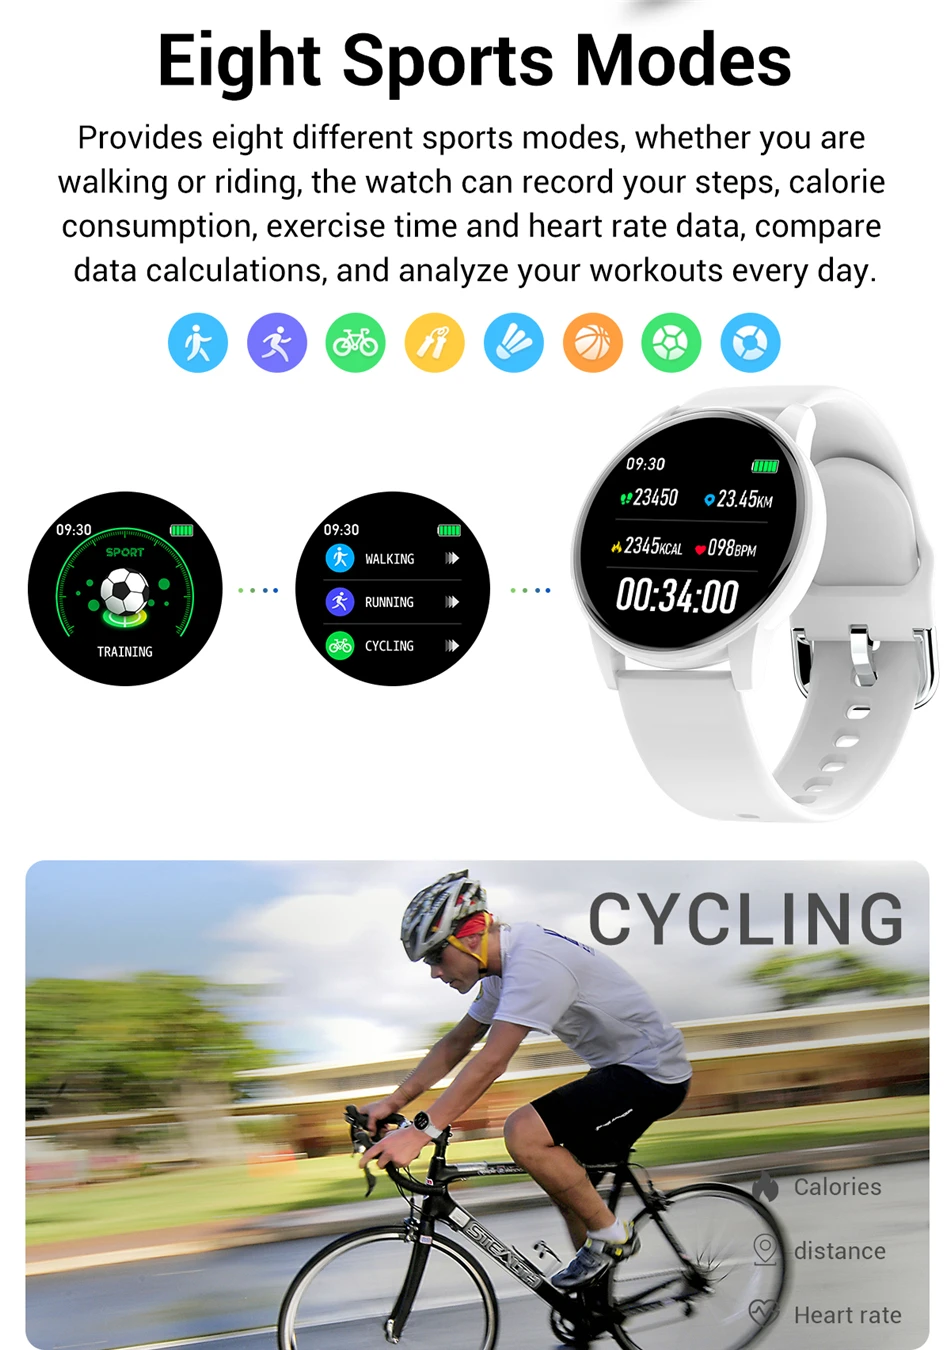 Unisex Sport Smart Watch For Android IOS